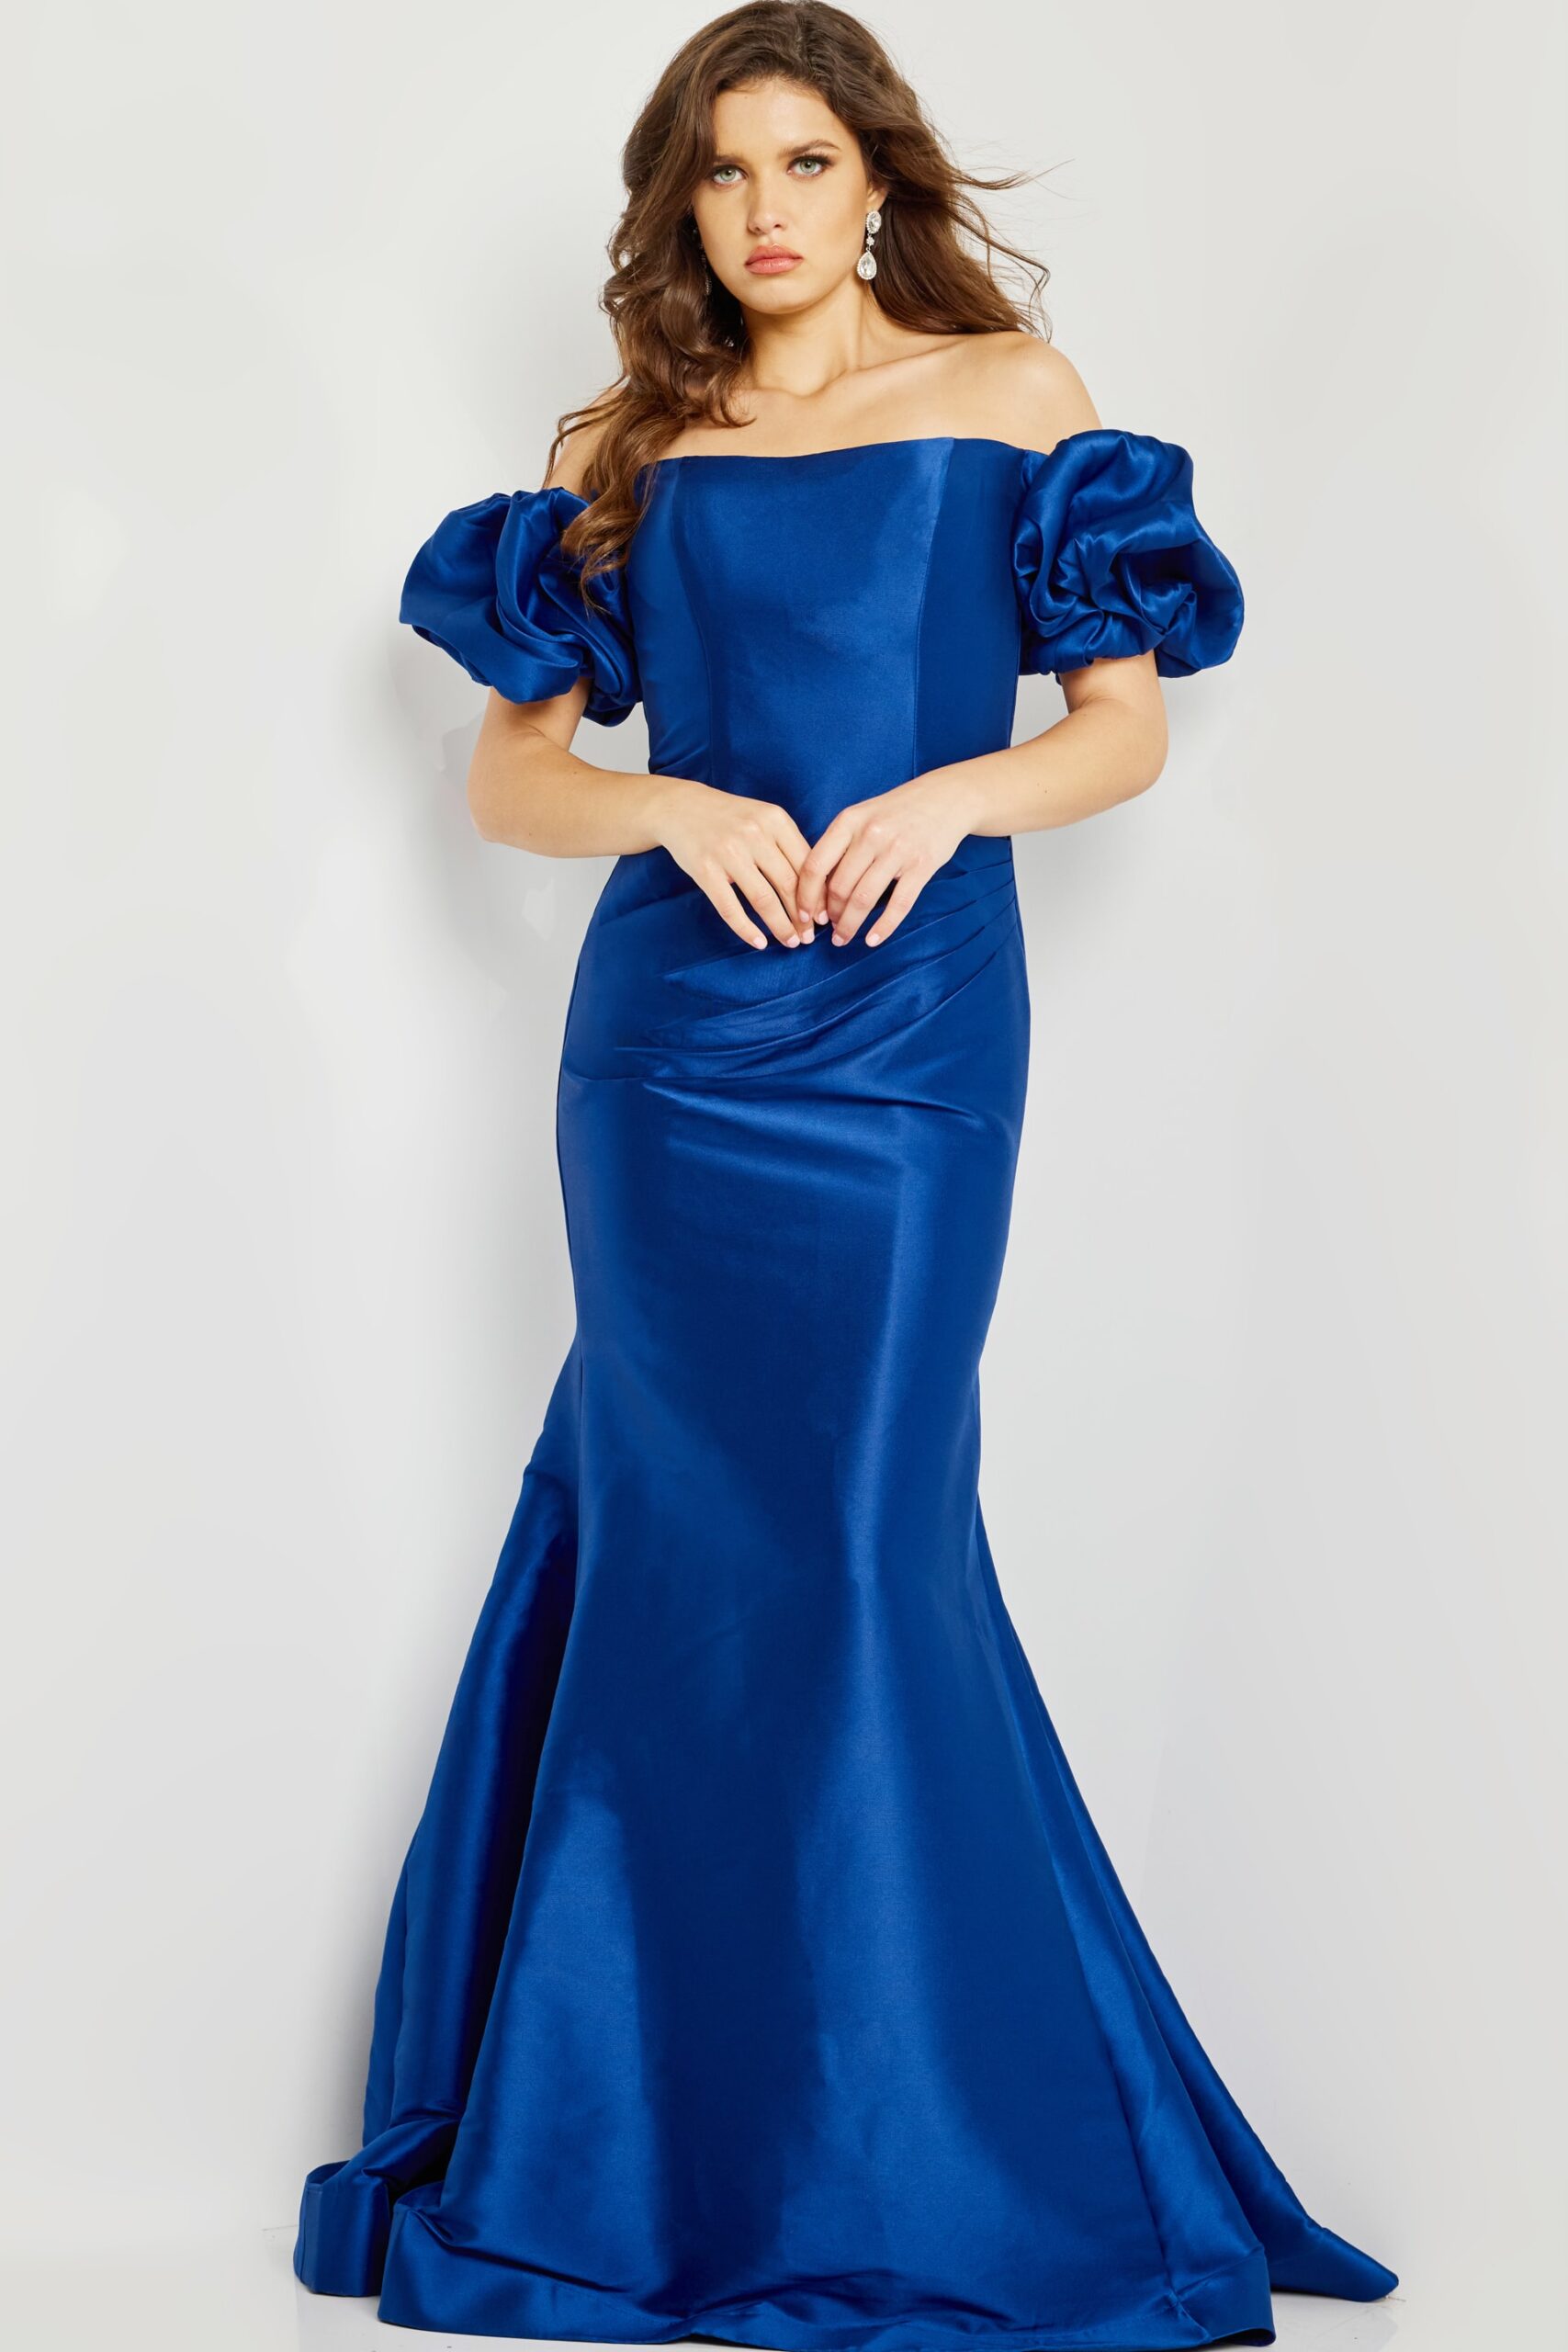 Strapless Ruched Mermaid Formal Gown 08361